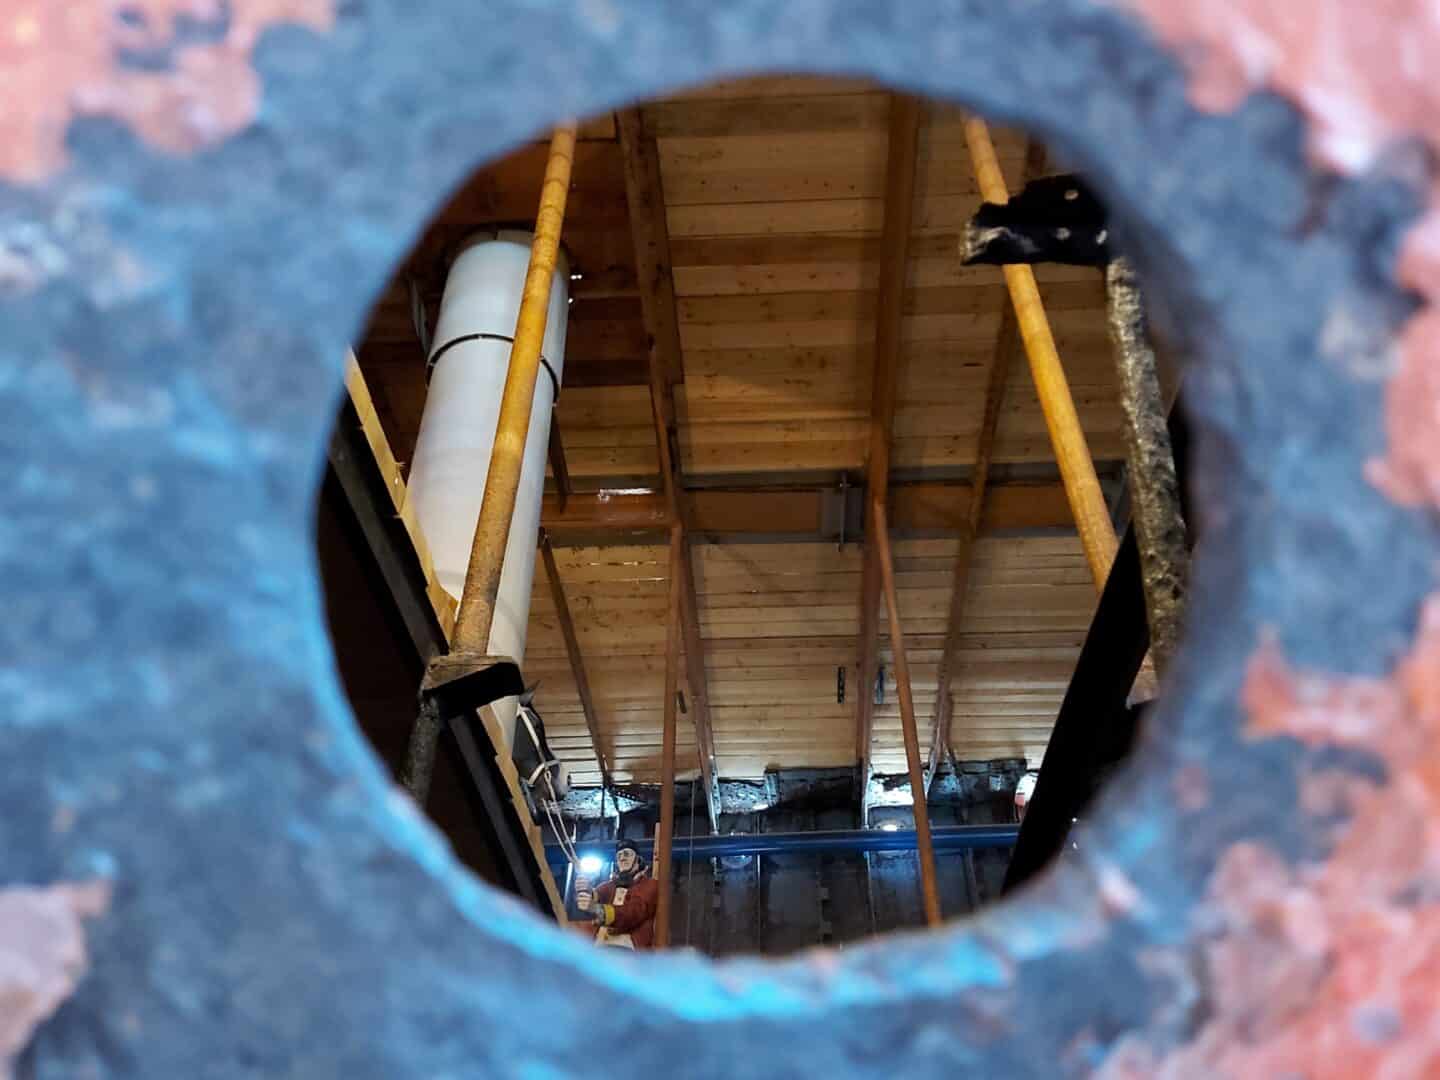 Hole in the side of the ship